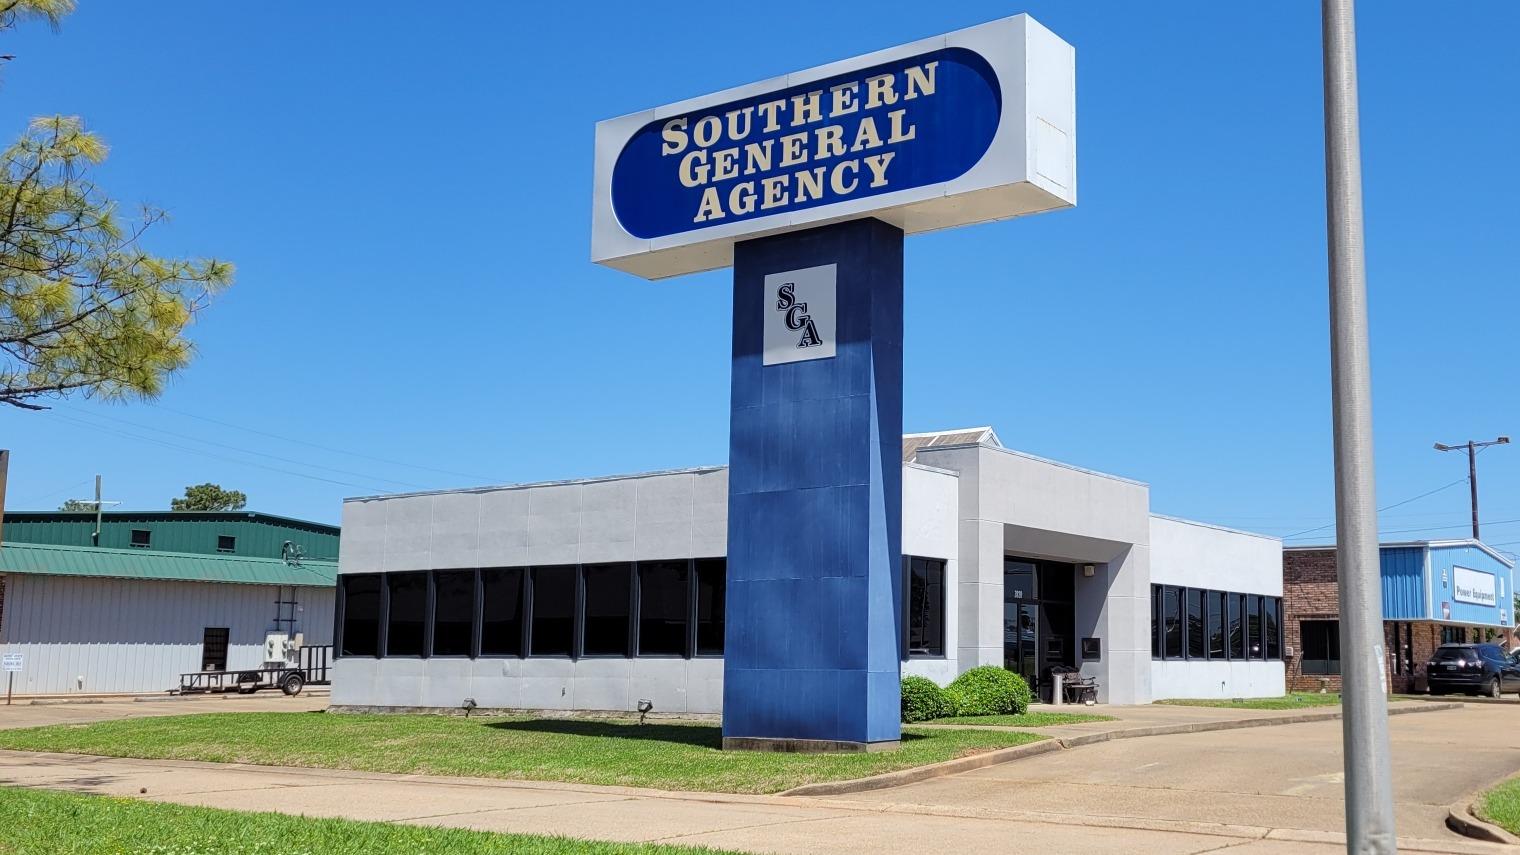 Southern General Agency